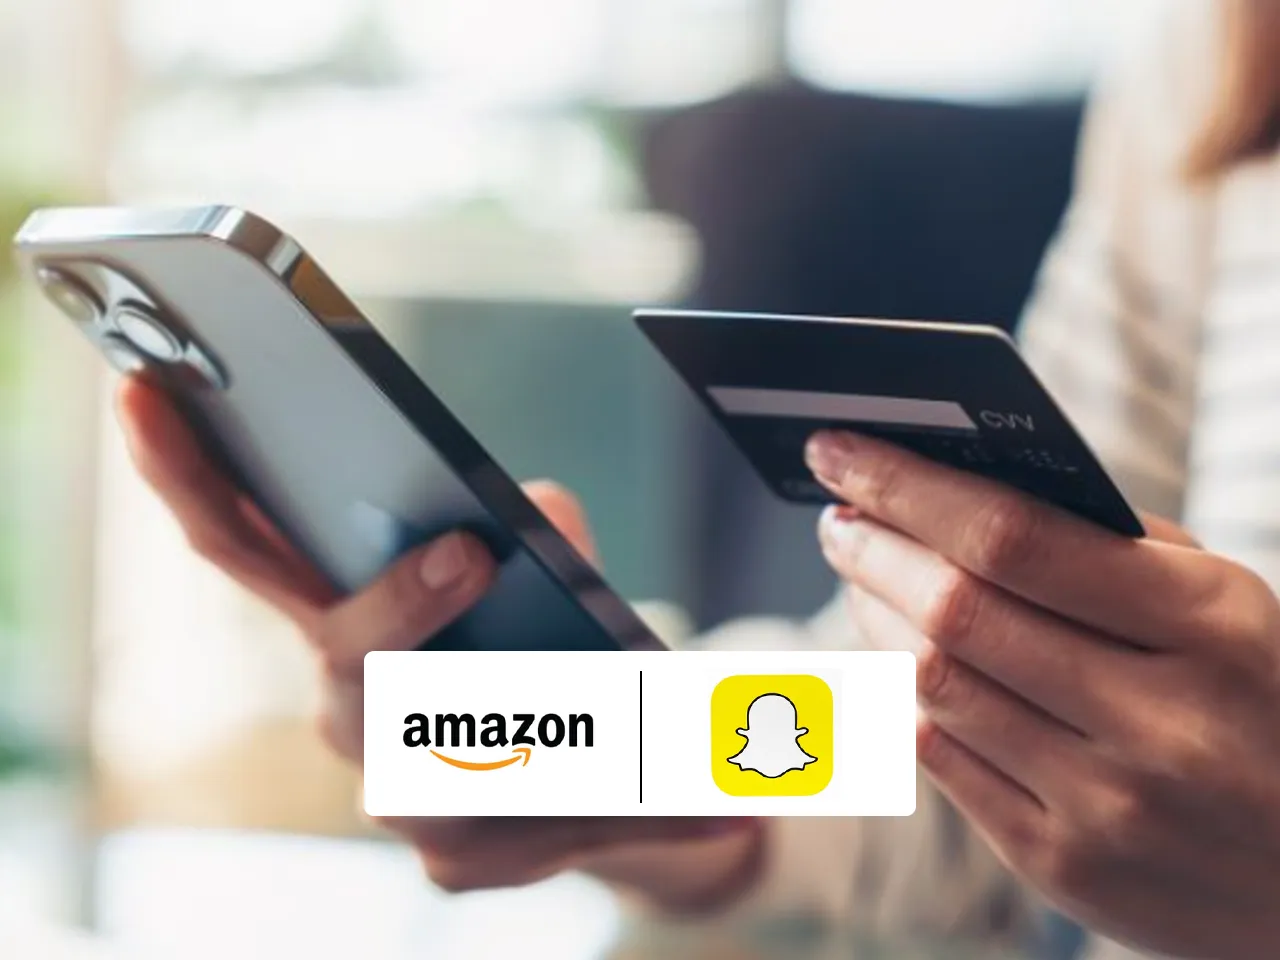 Snapchat users can now buy Amazon products on the app